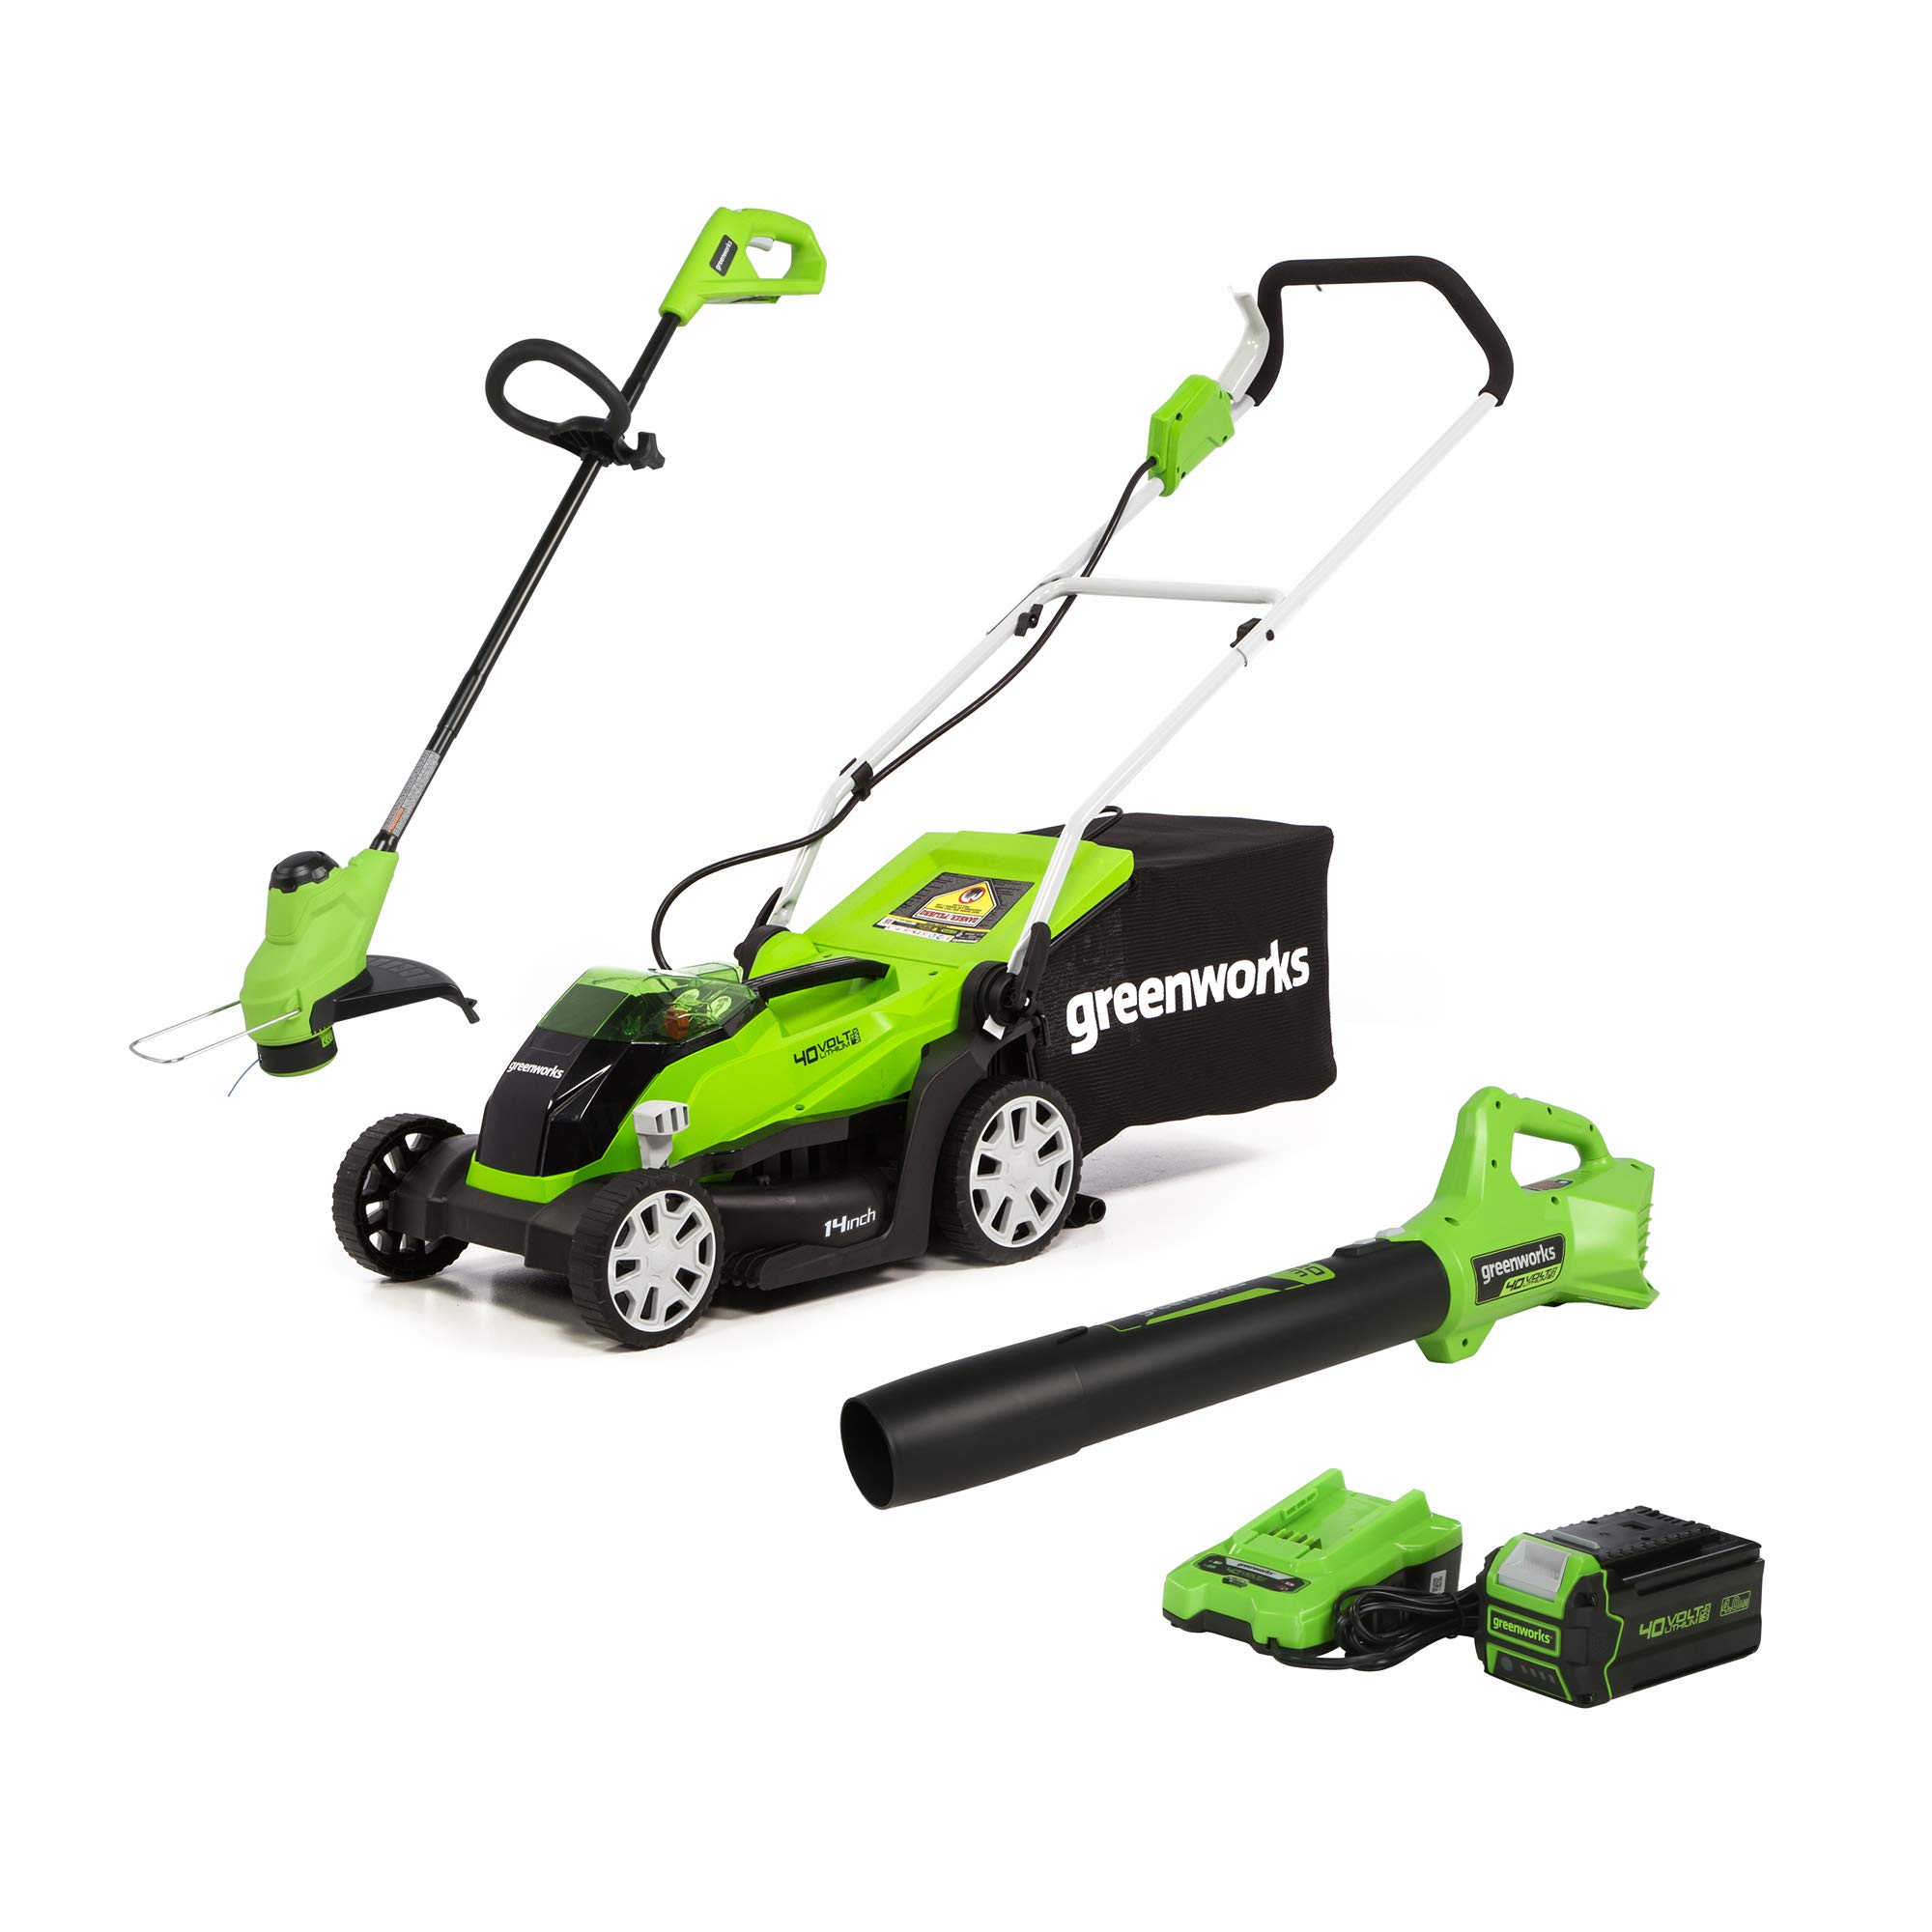 Greenworks 40V 14" Mower/Axial Blower/12" String Trimmer Combo Kit w/ 4Ah USB Battery & Charger $300 + Free Shipping